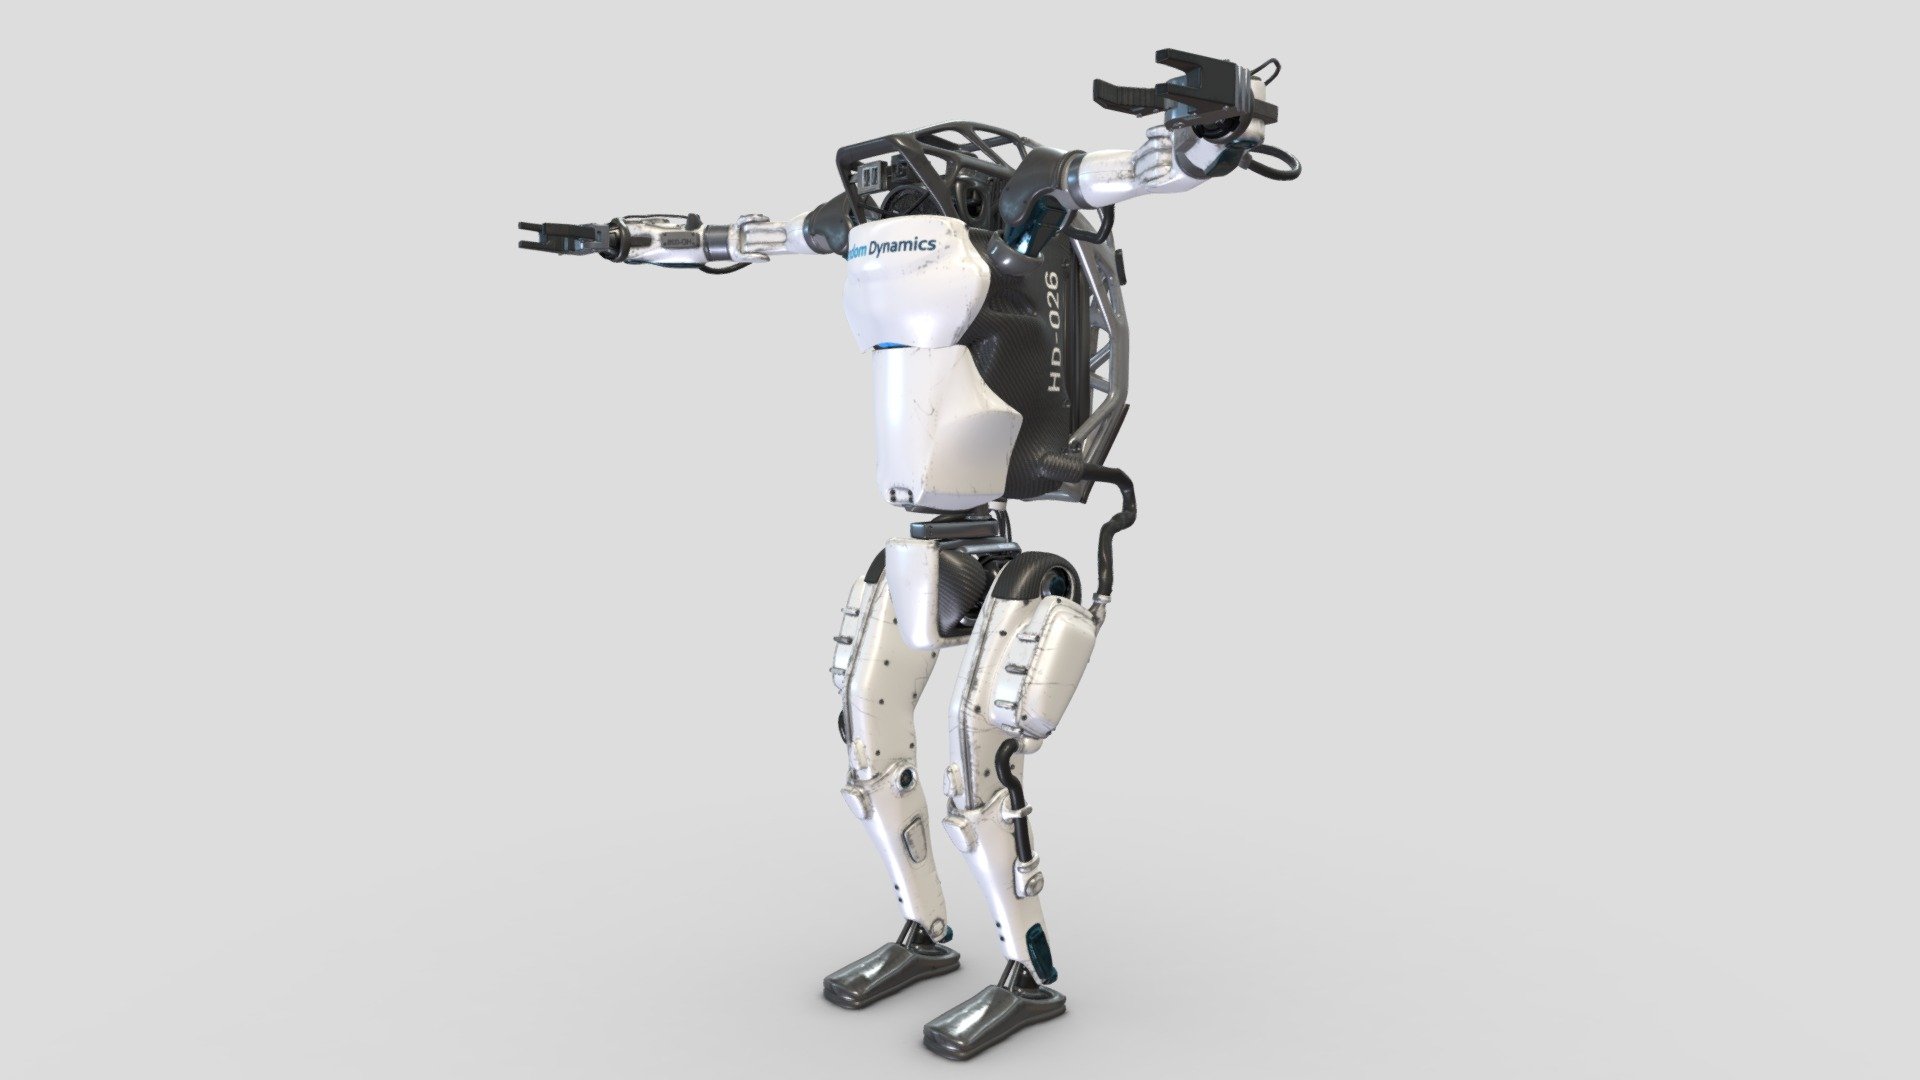 This is Random Represent version of Atlas 2023 the robot of boston dynamics animated full rigged.
Blender file and FBX.                                                                                                                                                                                                                        

Unwrapped UV. PBR material.                                                                                                                                                                                                        

Textures and maps 4096x4096 resolution in .png file format.                                                                    

Included texture maps: Diffuse, Normal, Ambient Occlusion, Specular, Roughness.                           

Printable 3d model